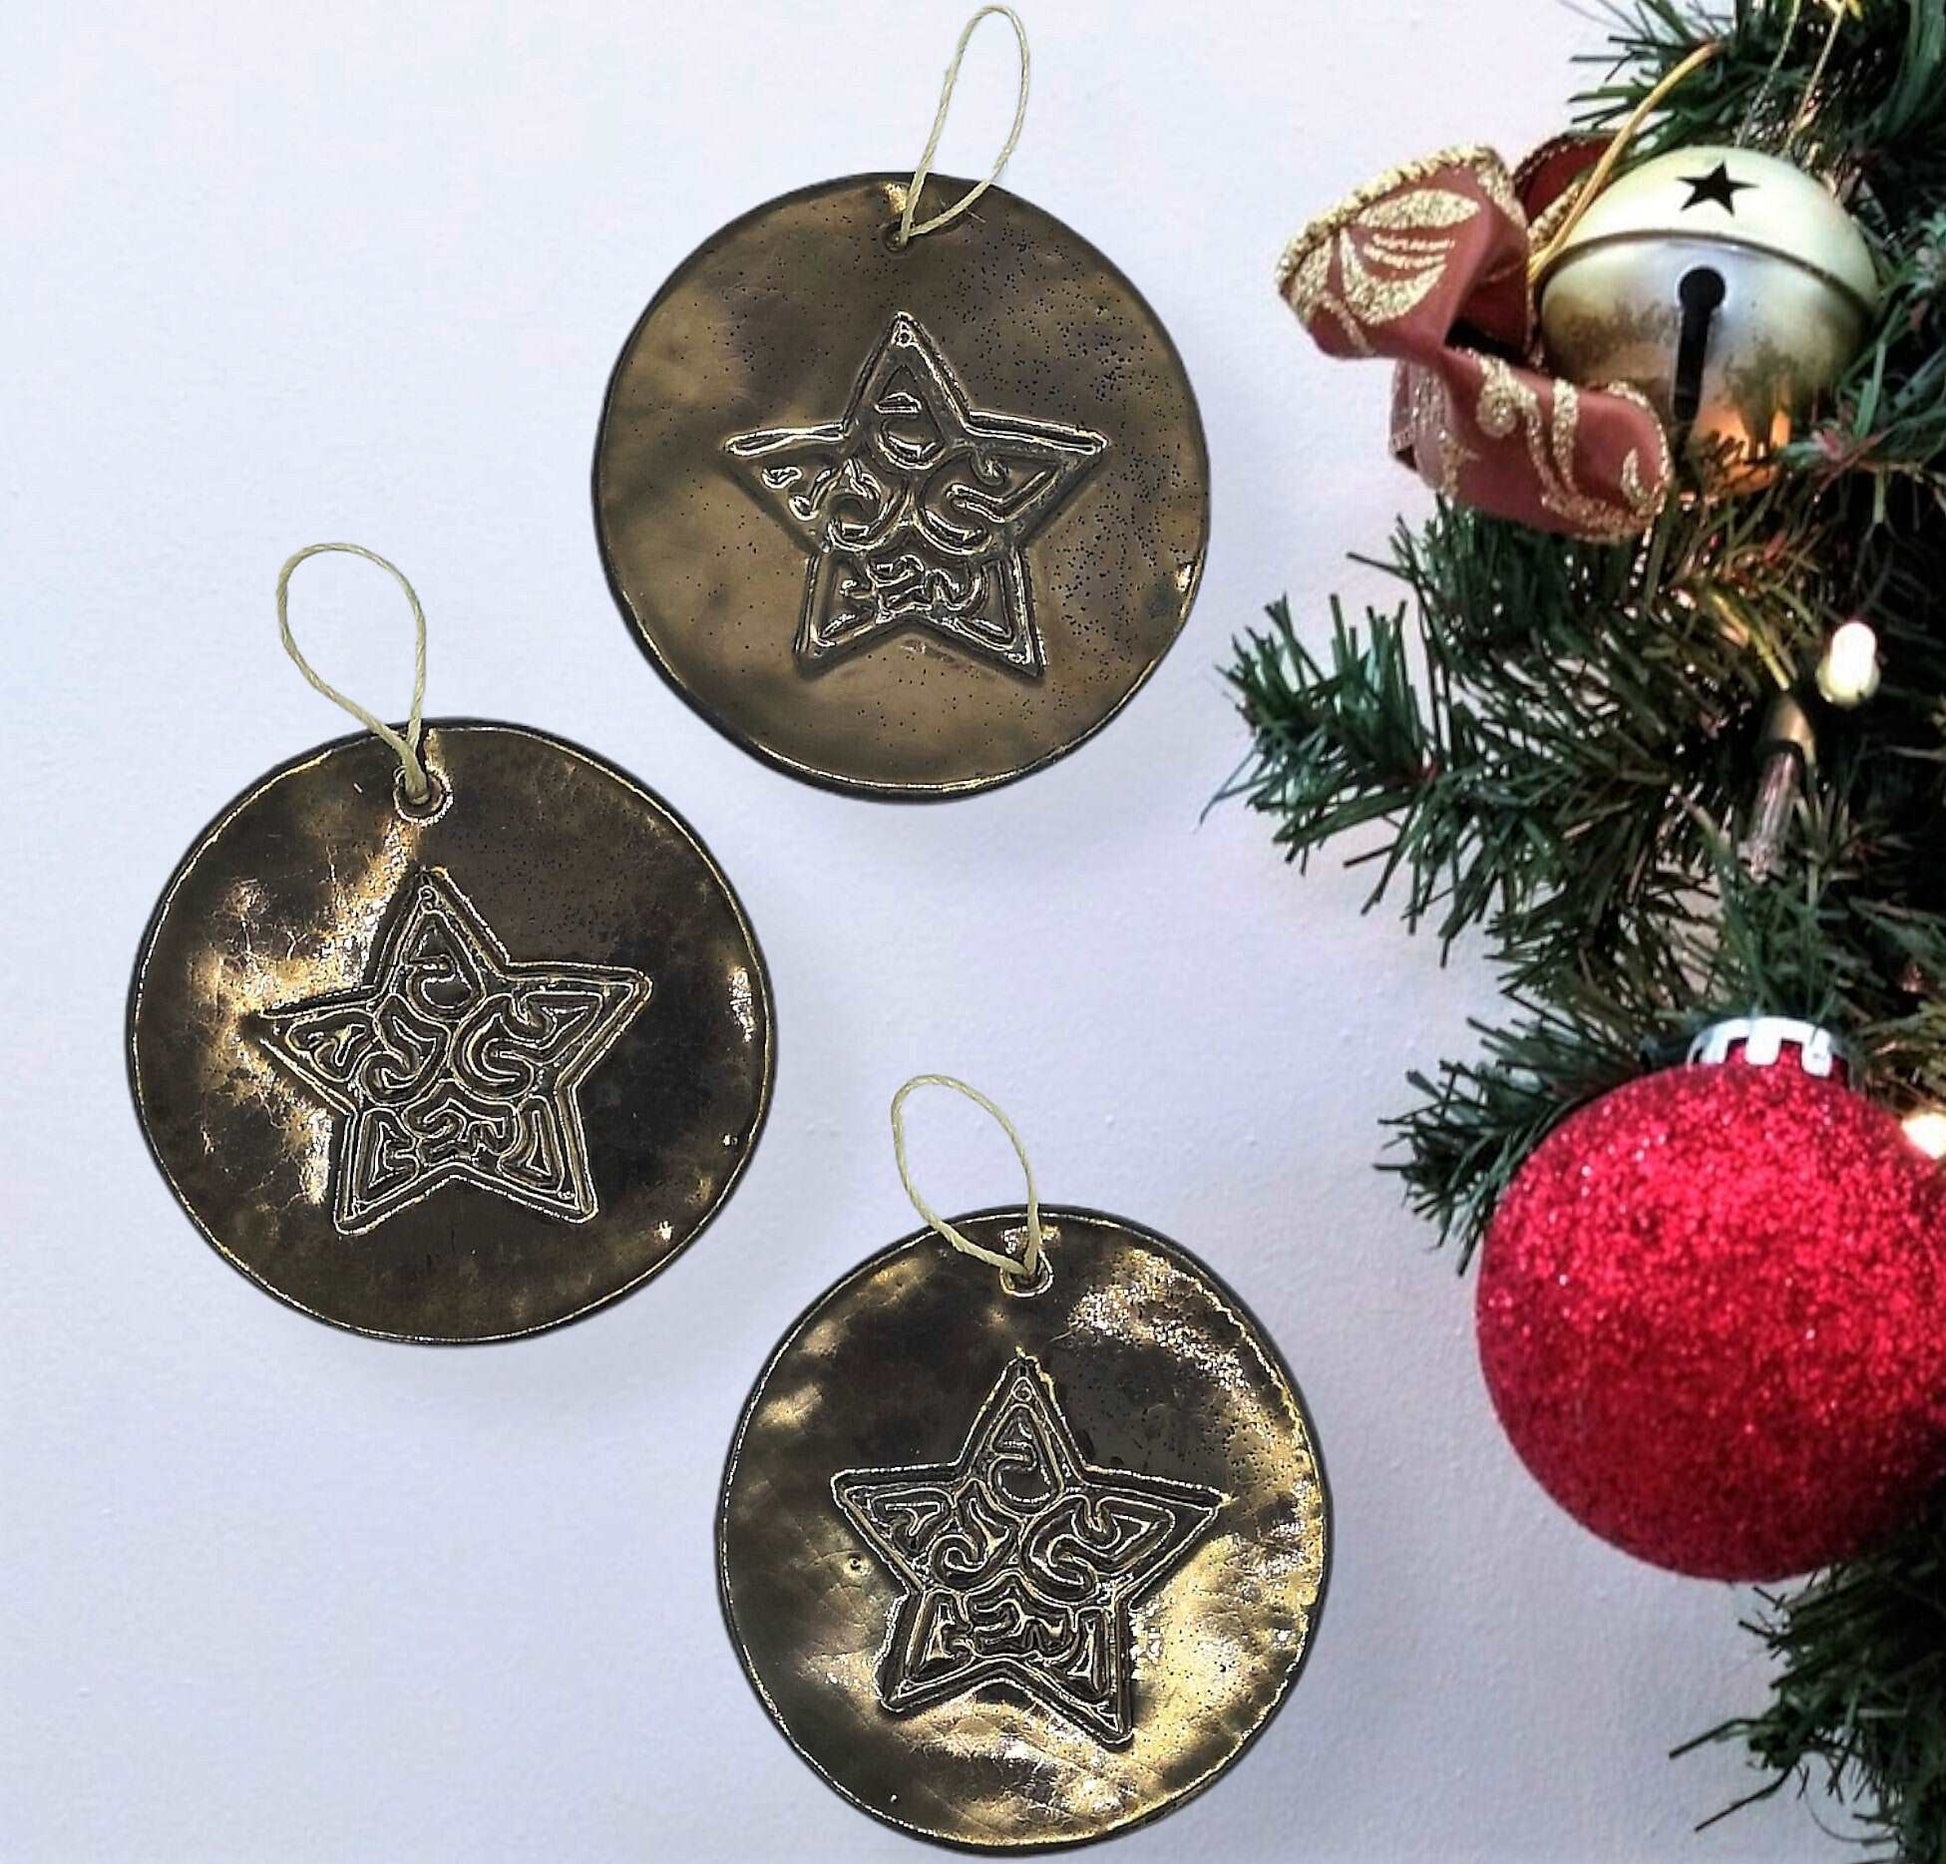 1Pc Large Handmade Ceramic Star Wall Hanging, Golden Christmas Tree Ornament, Holliday Home Decor, Secret Sister Gifts